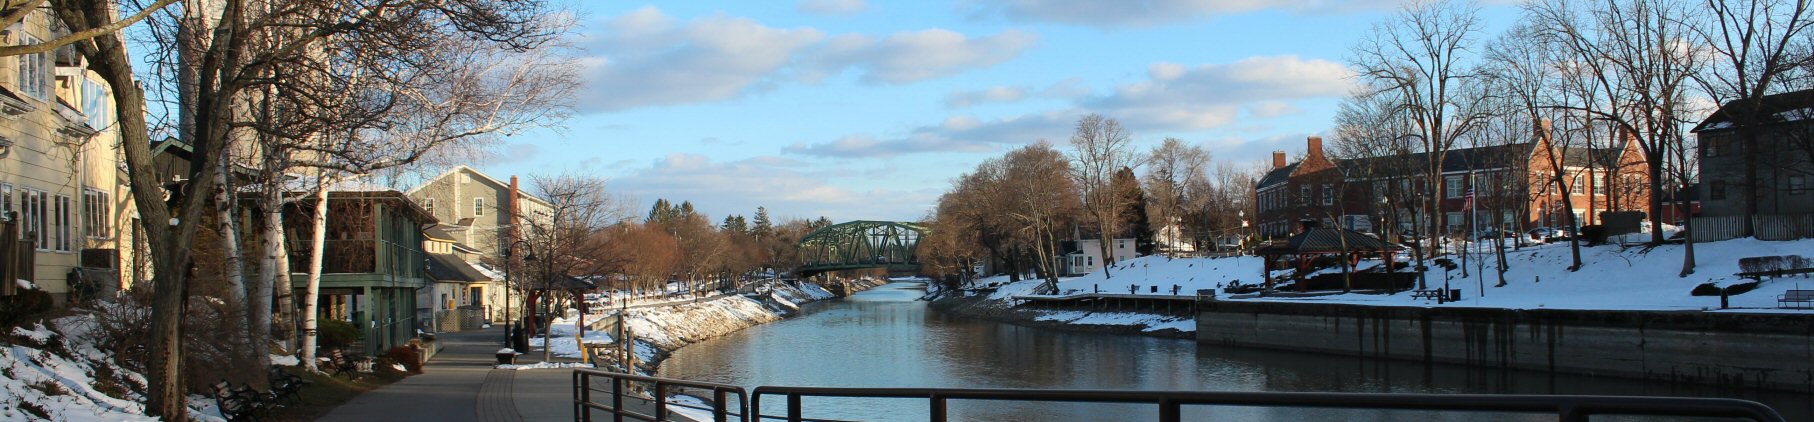 Erie Canal at Pittsford NY